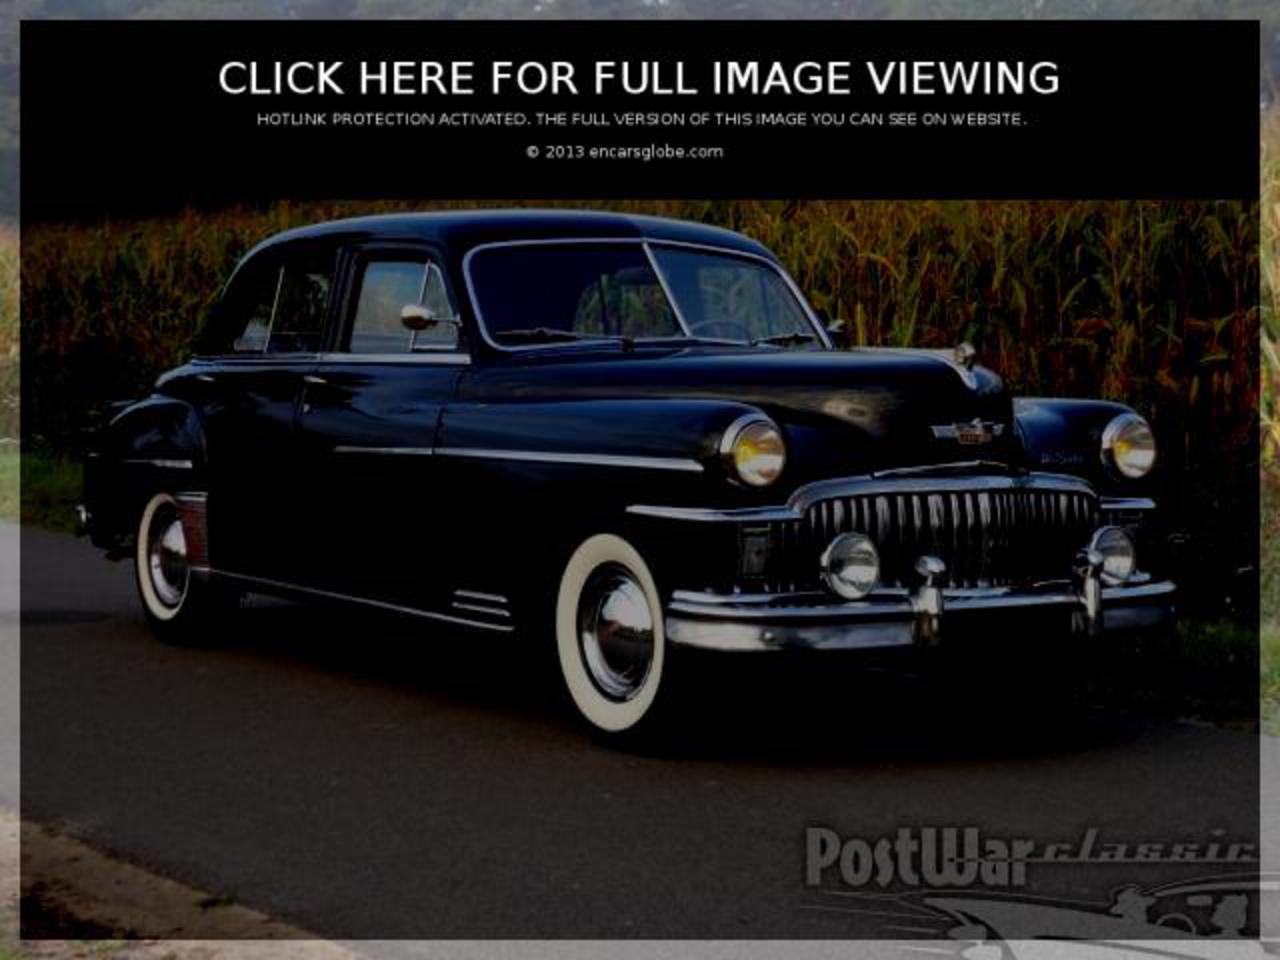 De Soto Custom Fluid Drive Photo Gallery: Photo #04 out of 11 ...